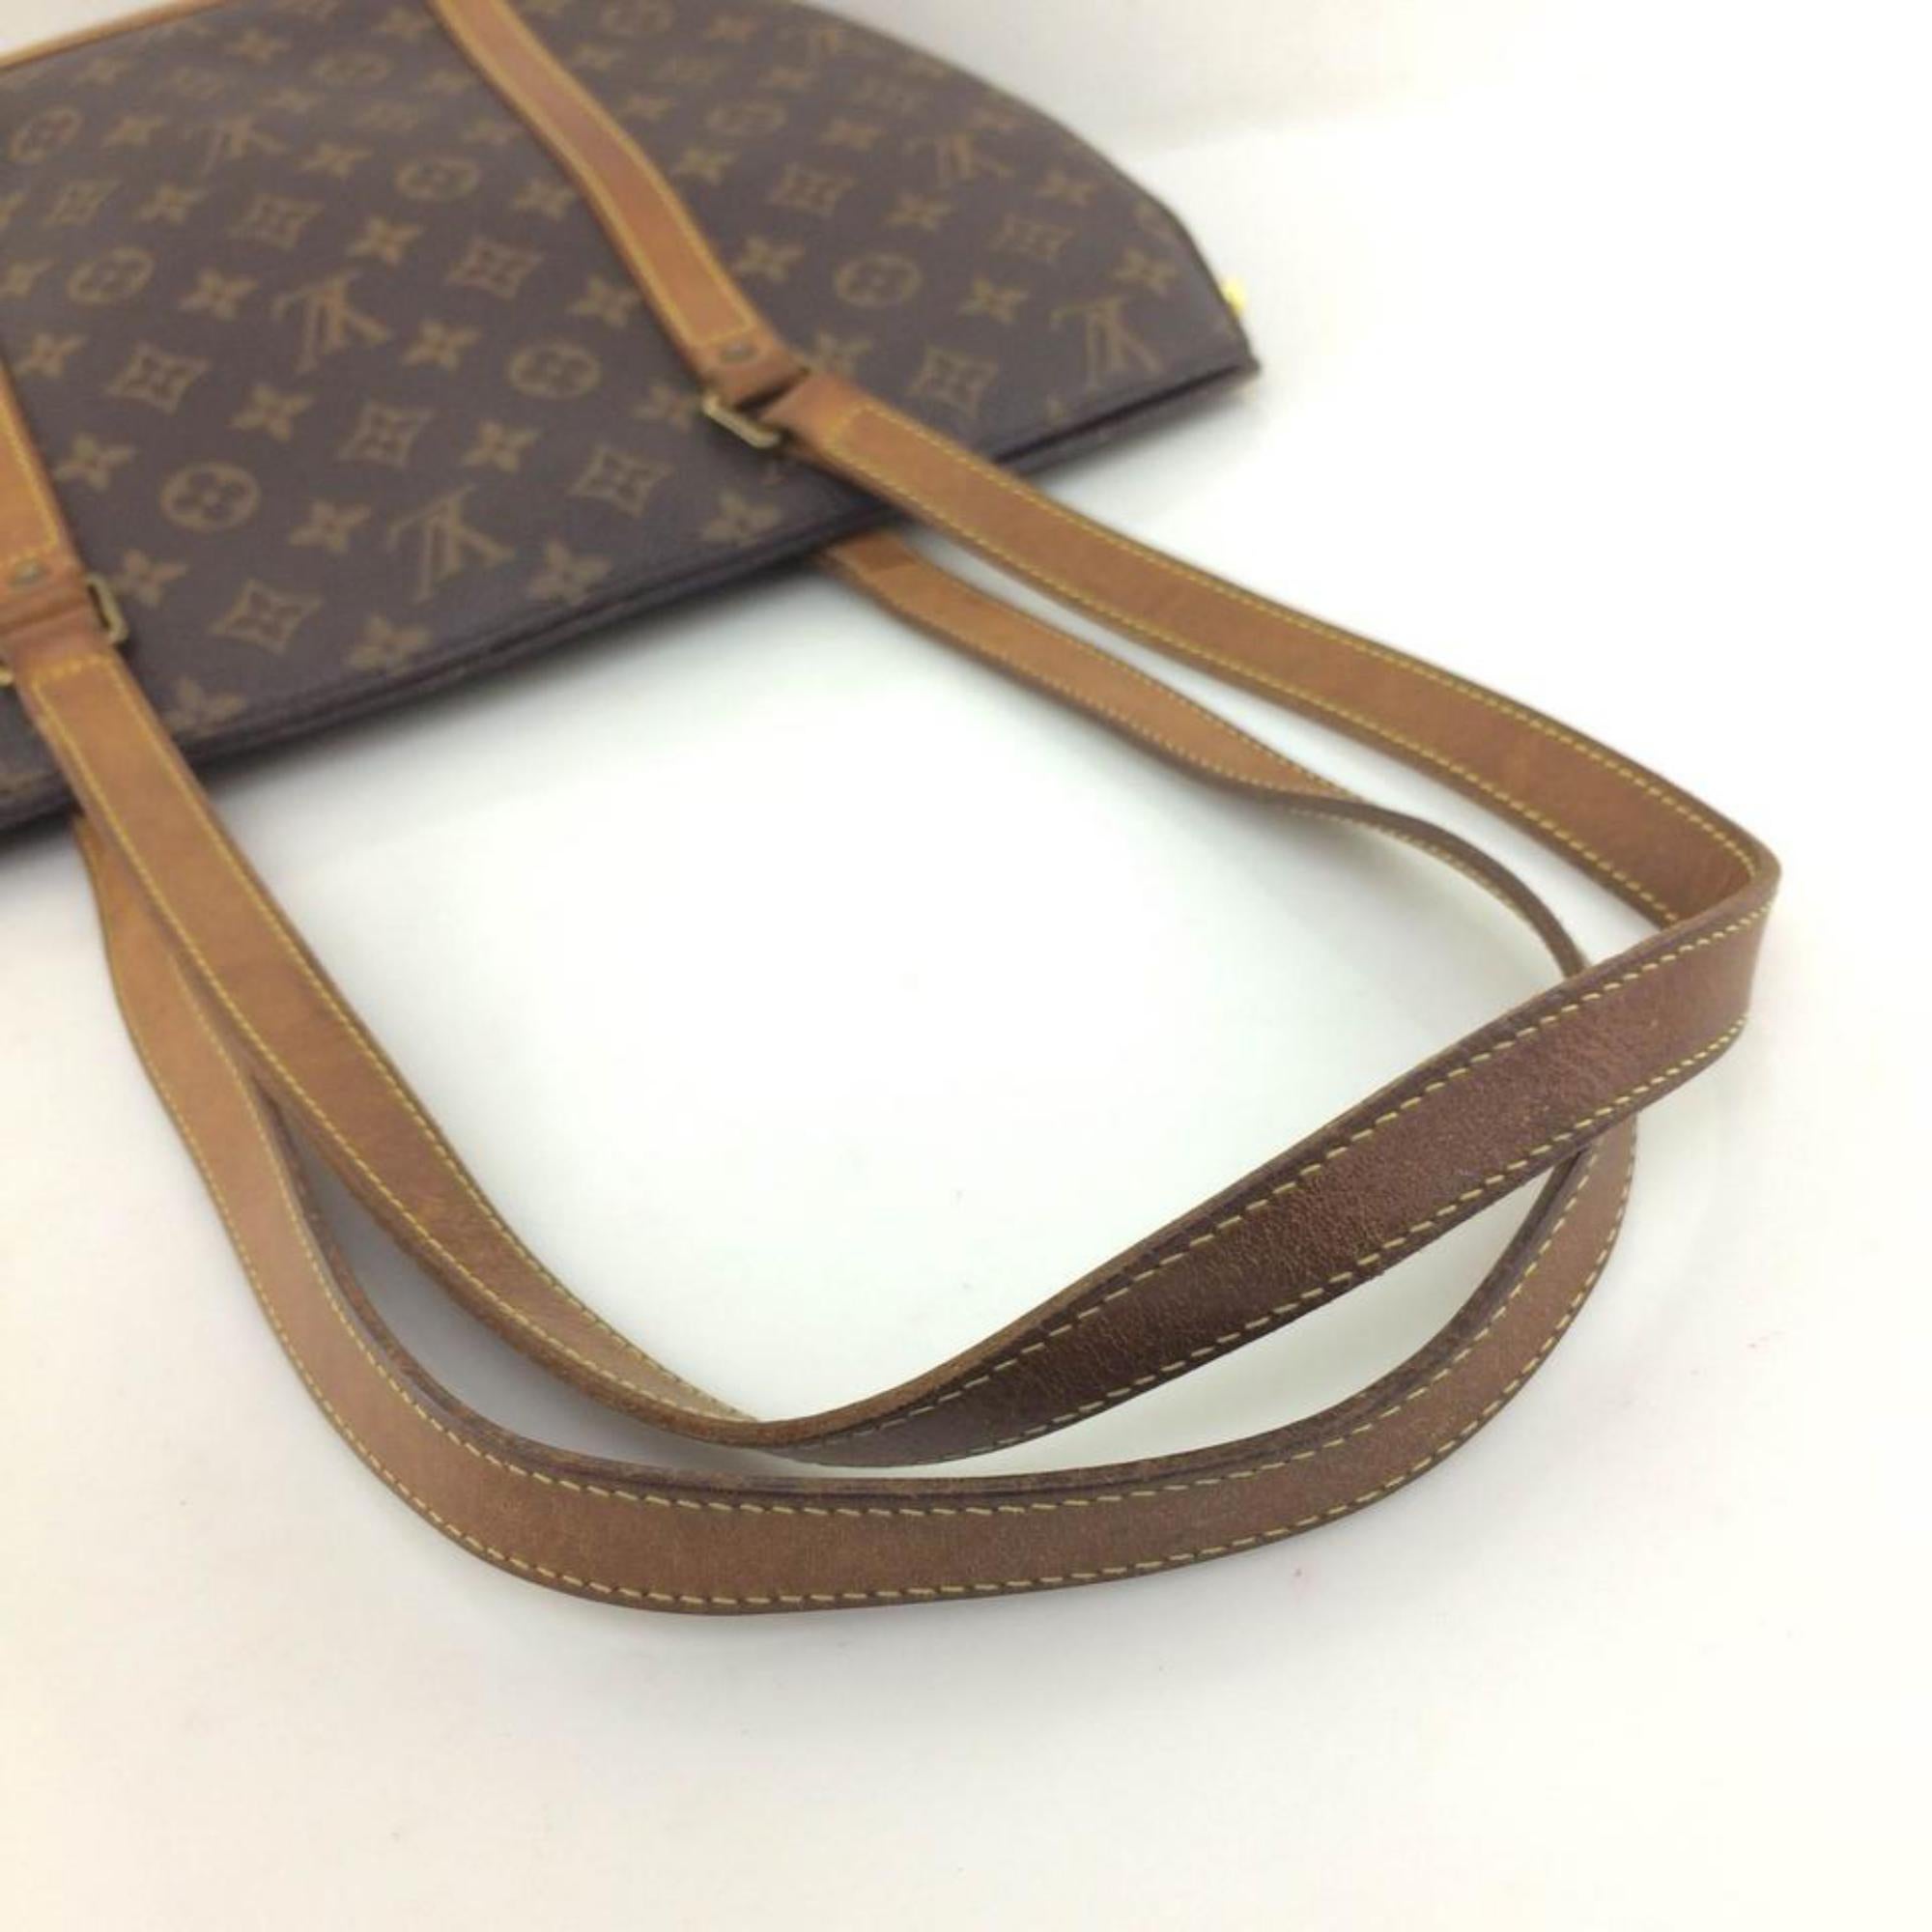 BrandLouis Vuitton
StyleShoulder Bag
MaterialCanvas leather
ColorMonogram canvas
Size13.7 inch
Country of ManufactureFrance
Size (inch) (Appro.)W13.7 x H11.8 x D4.3 